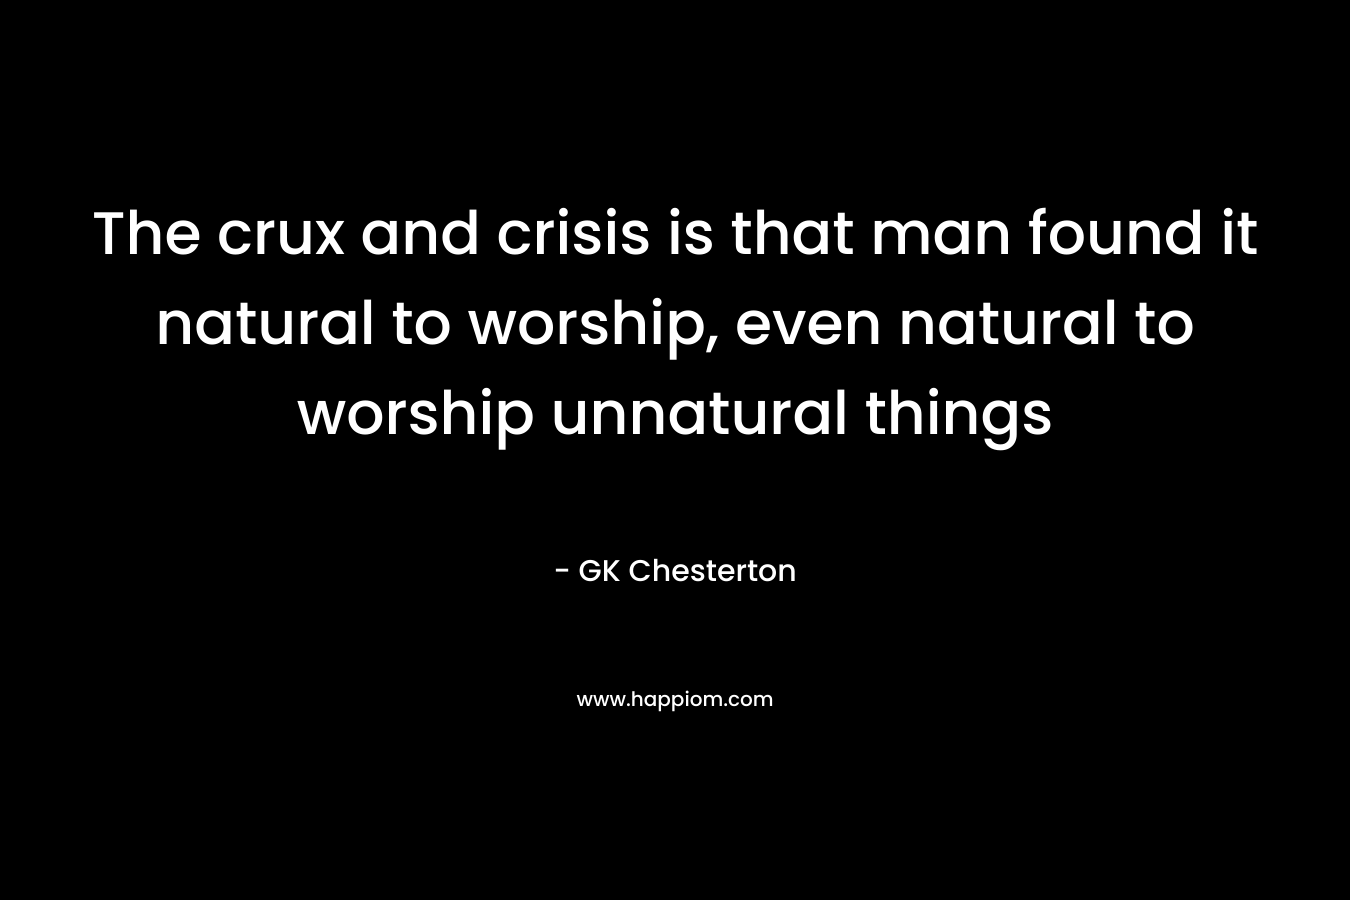 The crux and crisis is that man found it natural to worship, even natural to worship unnatural things